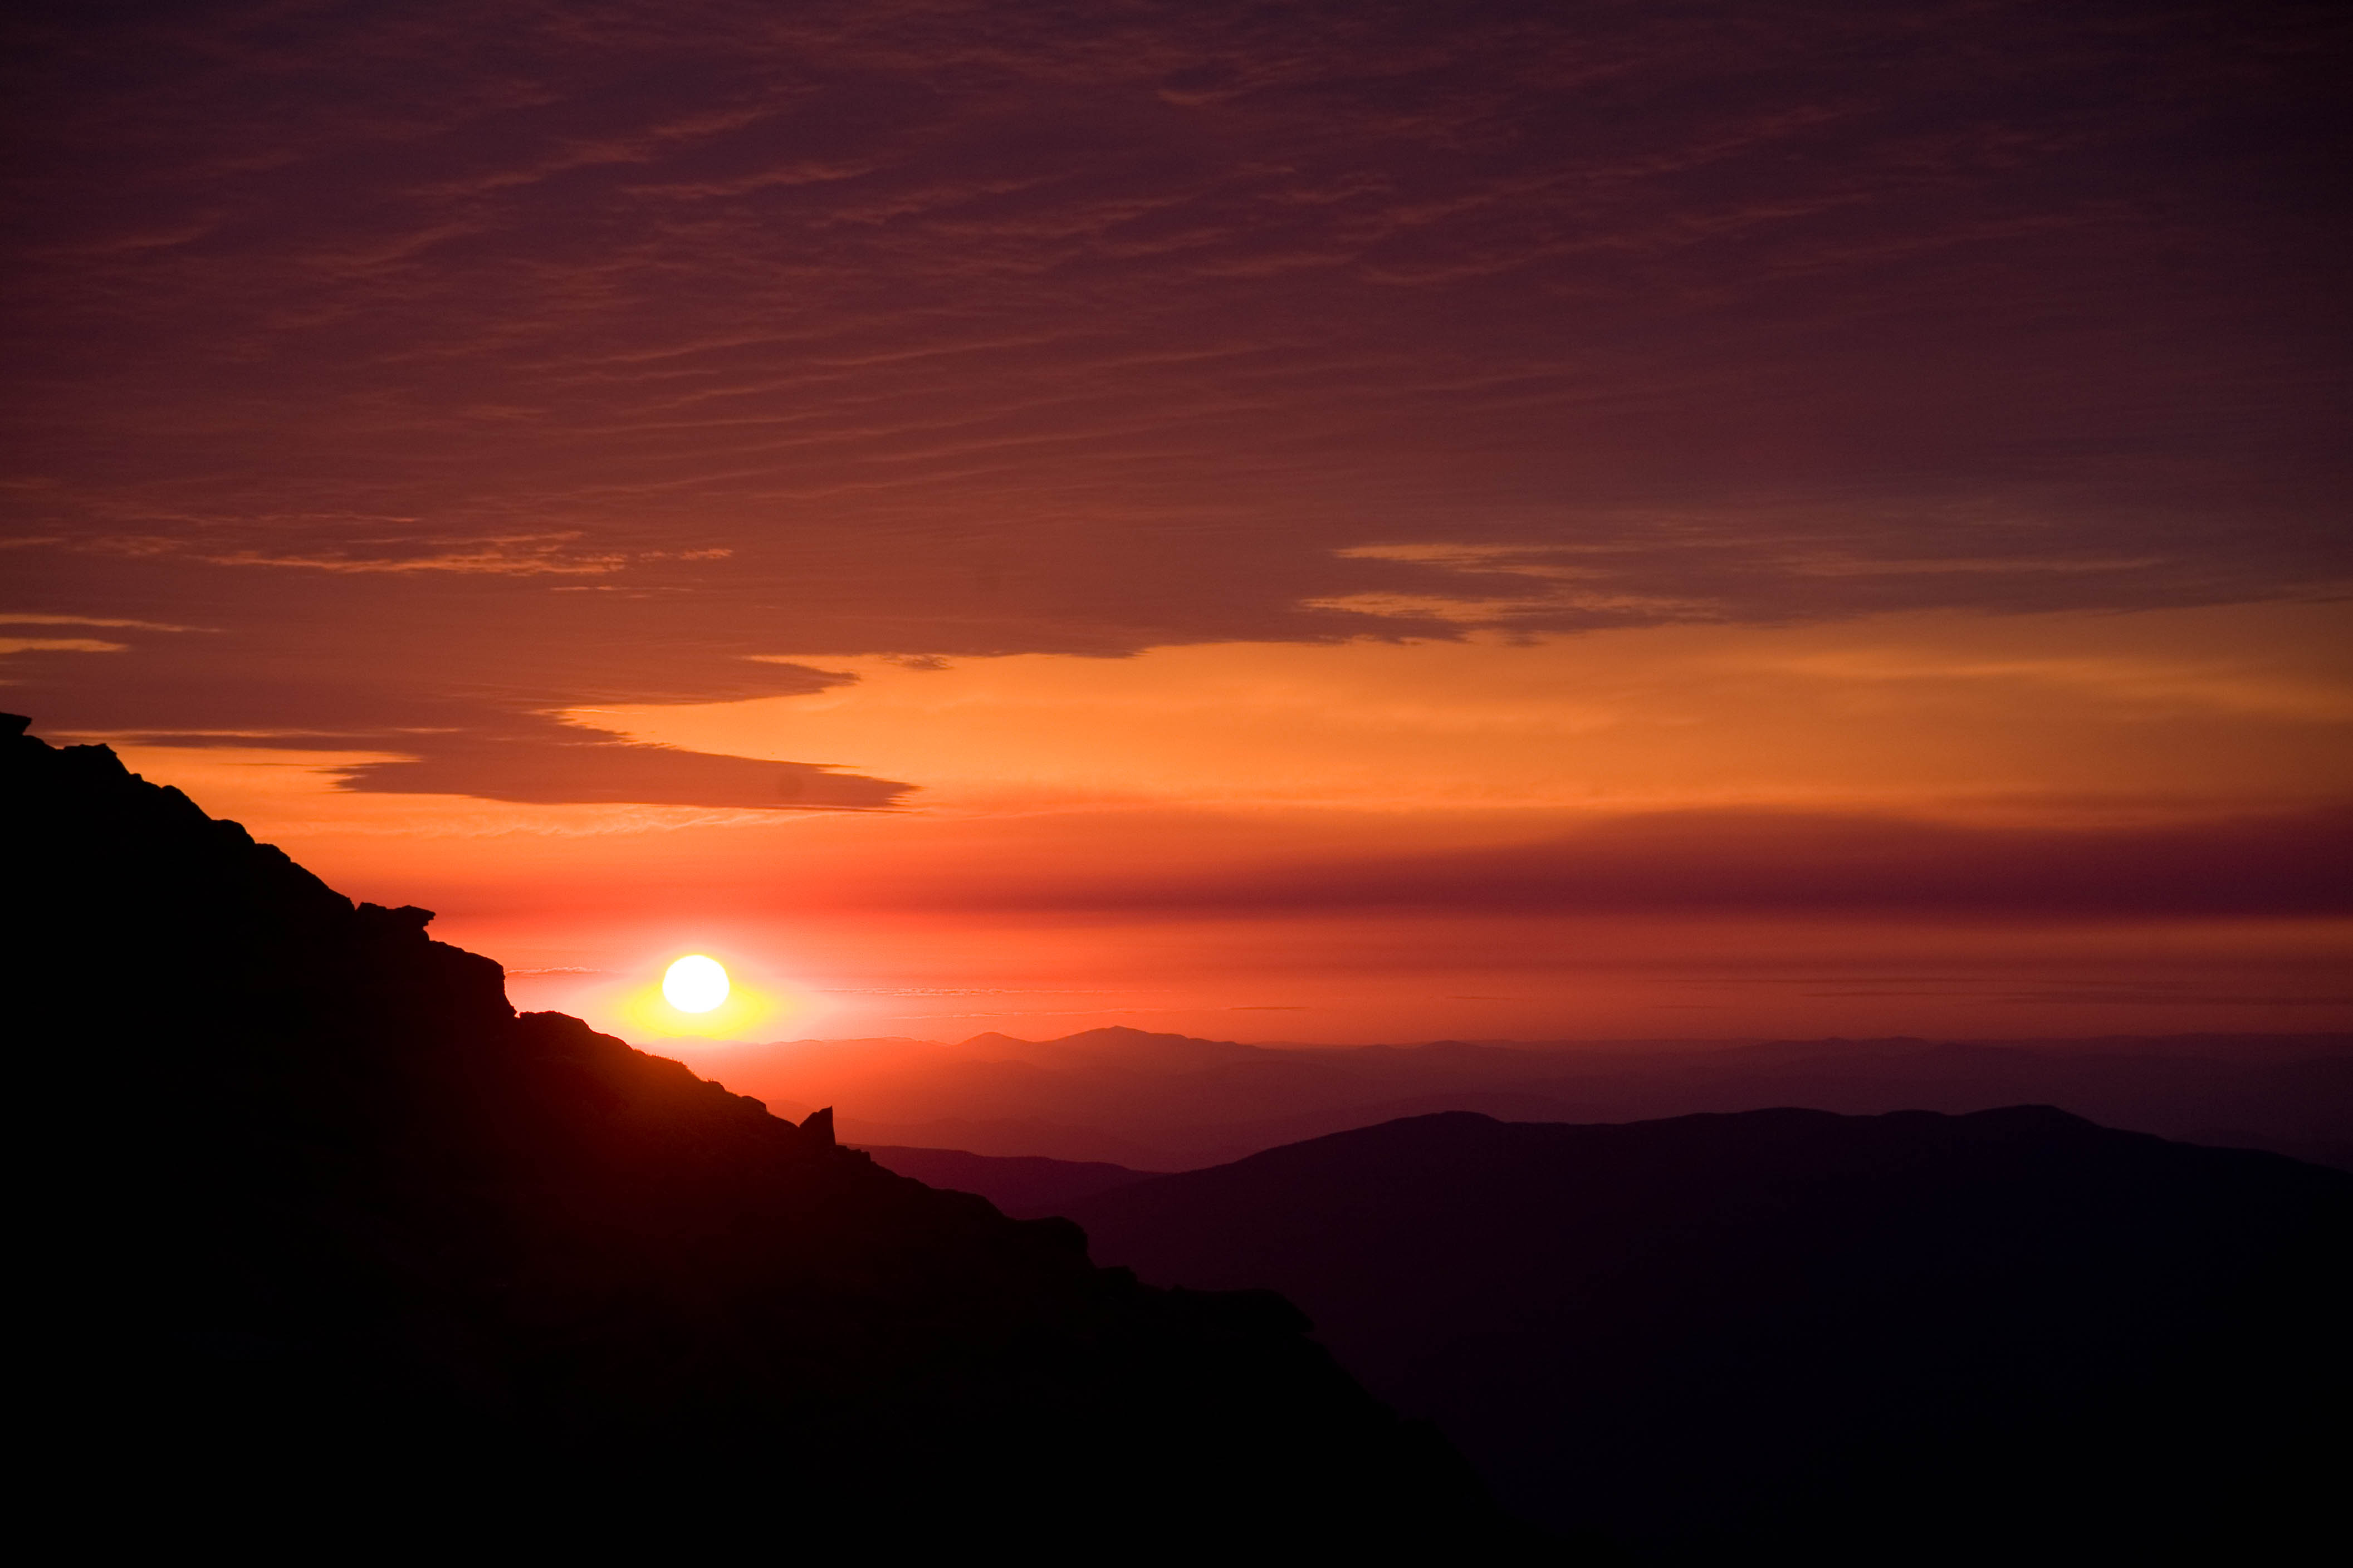 Summit Mt. Washington at Sunrise to Raise Funds for Families of Lost